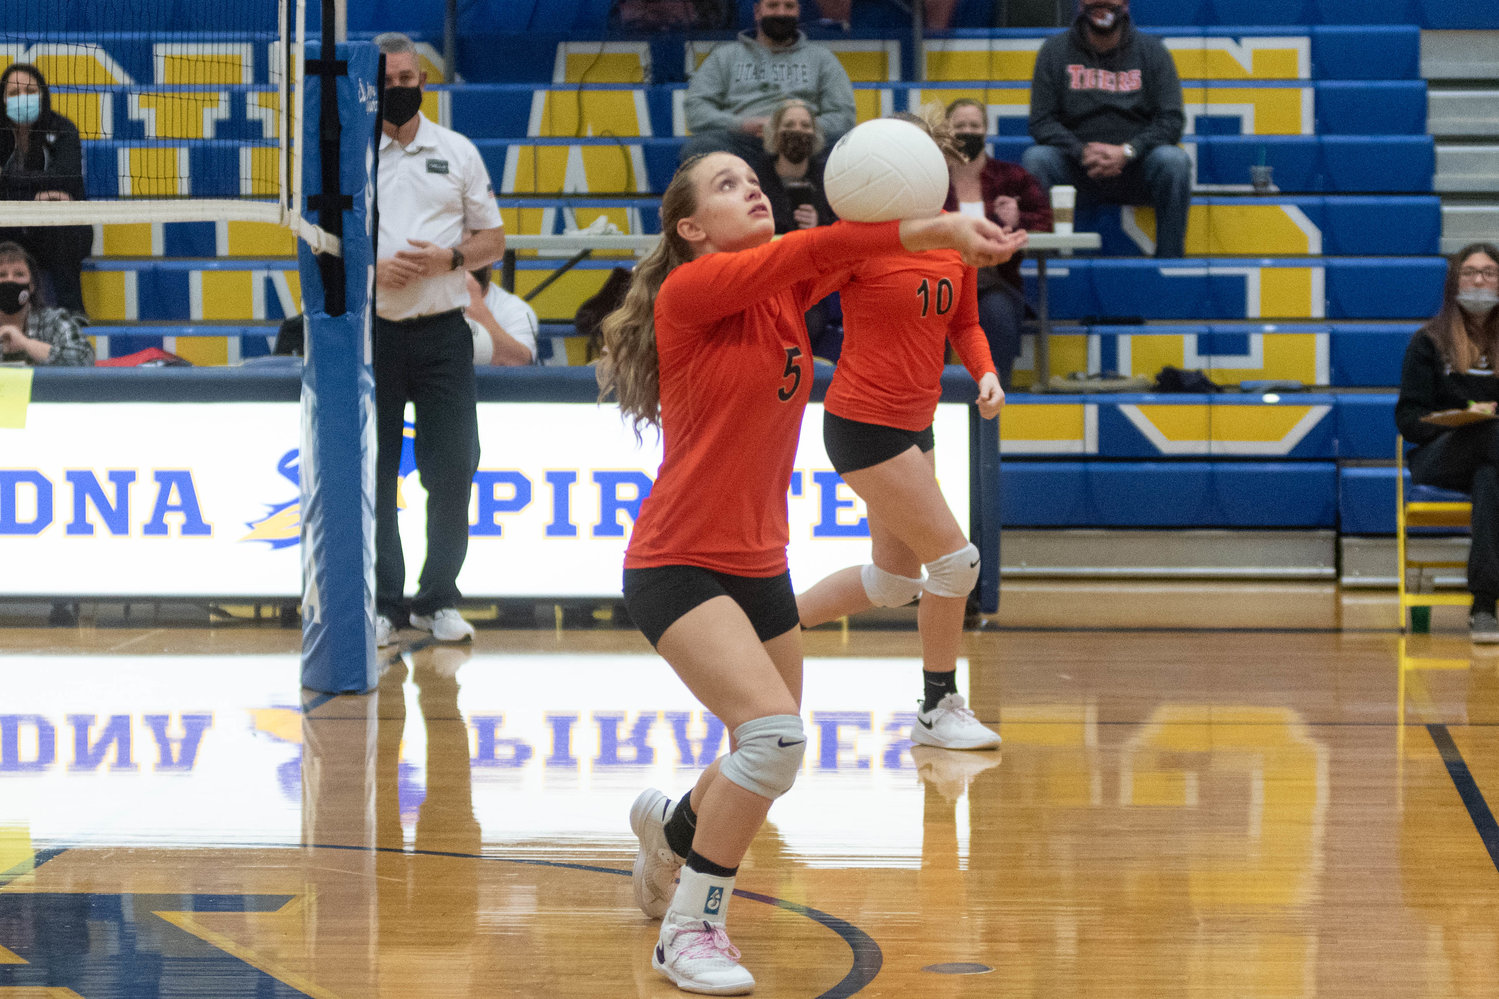 Napavine setter Avery Schutz passes to a teammate in the Tigers four set loss to Ocosta in the opening round of the District 4 Tournament in Adna Oct. 30.